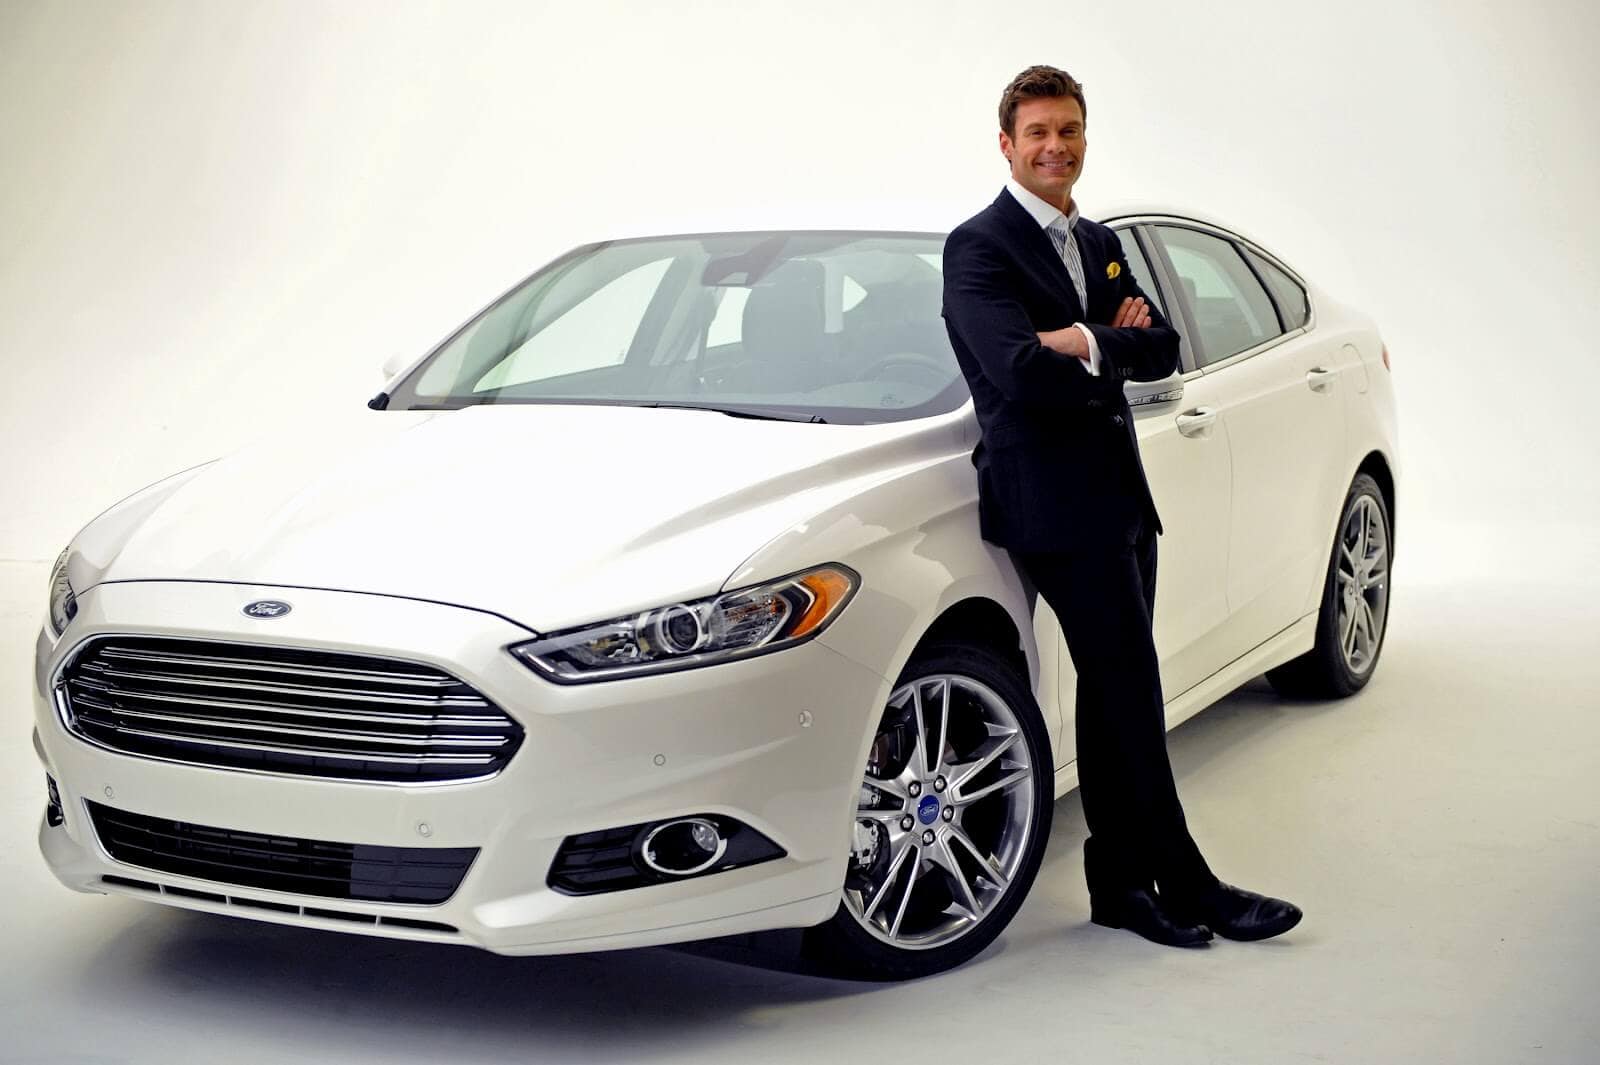 2013 Ford Fusion with Ryan Seacrest